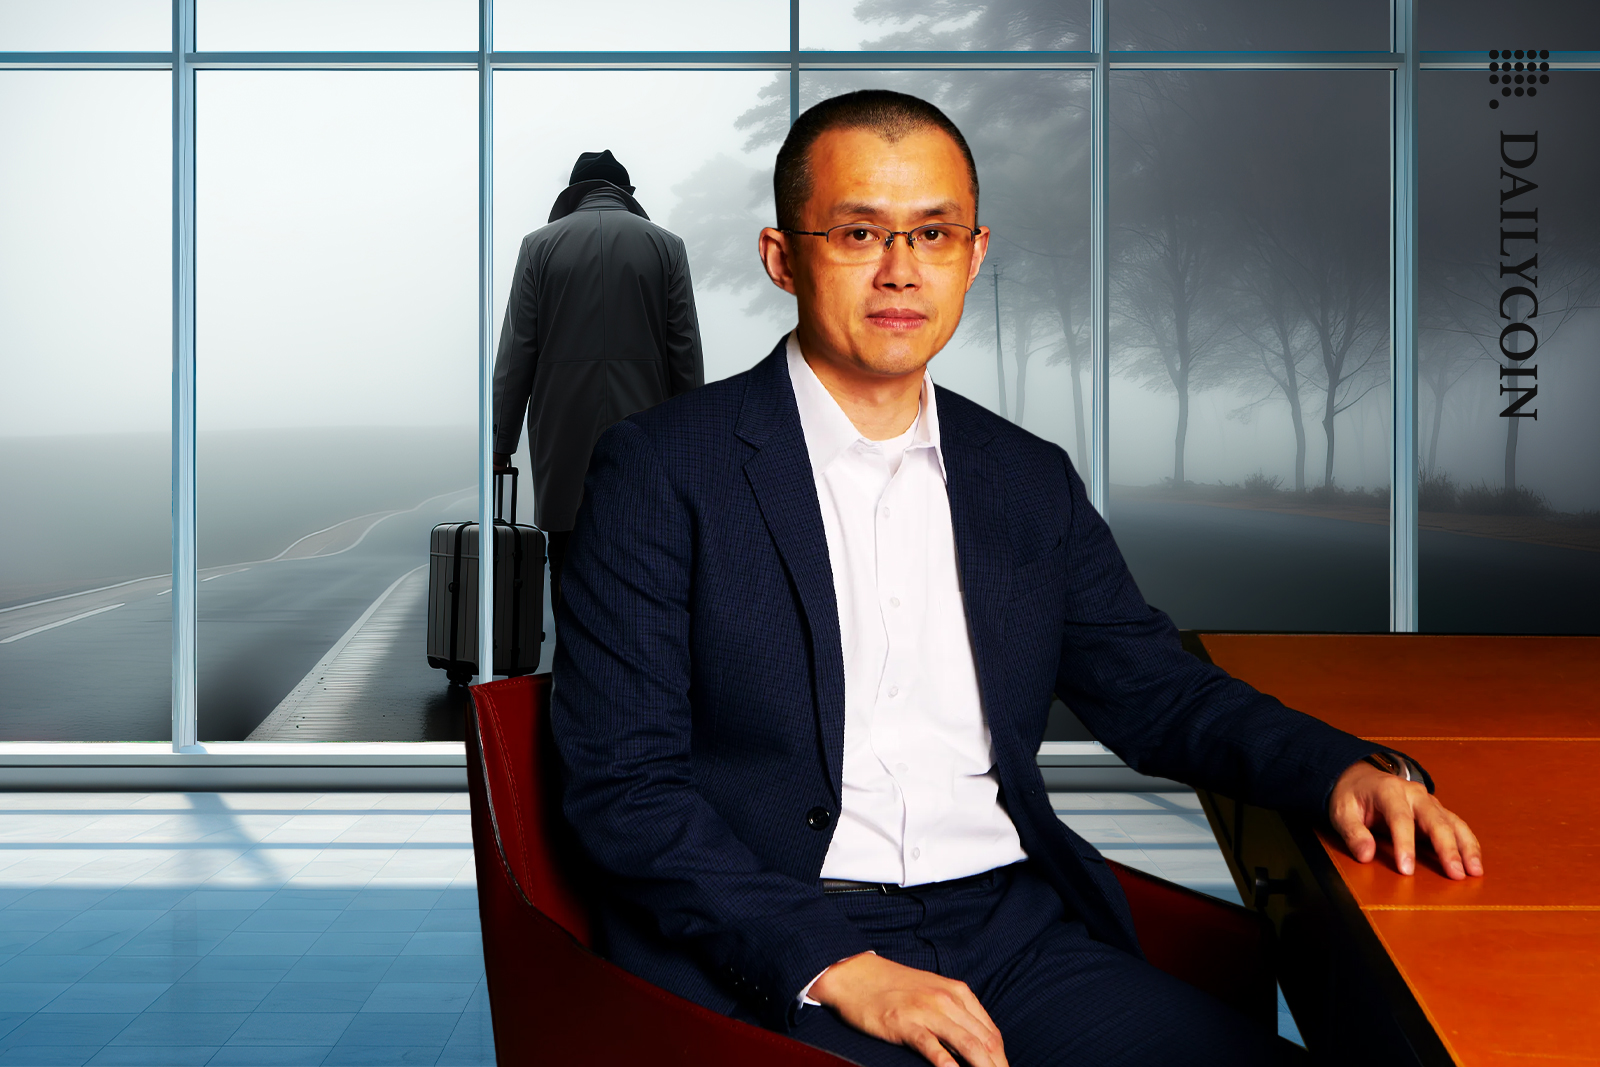 Changpeng Zhao sitting in the office as a man is seen leaving in the window.